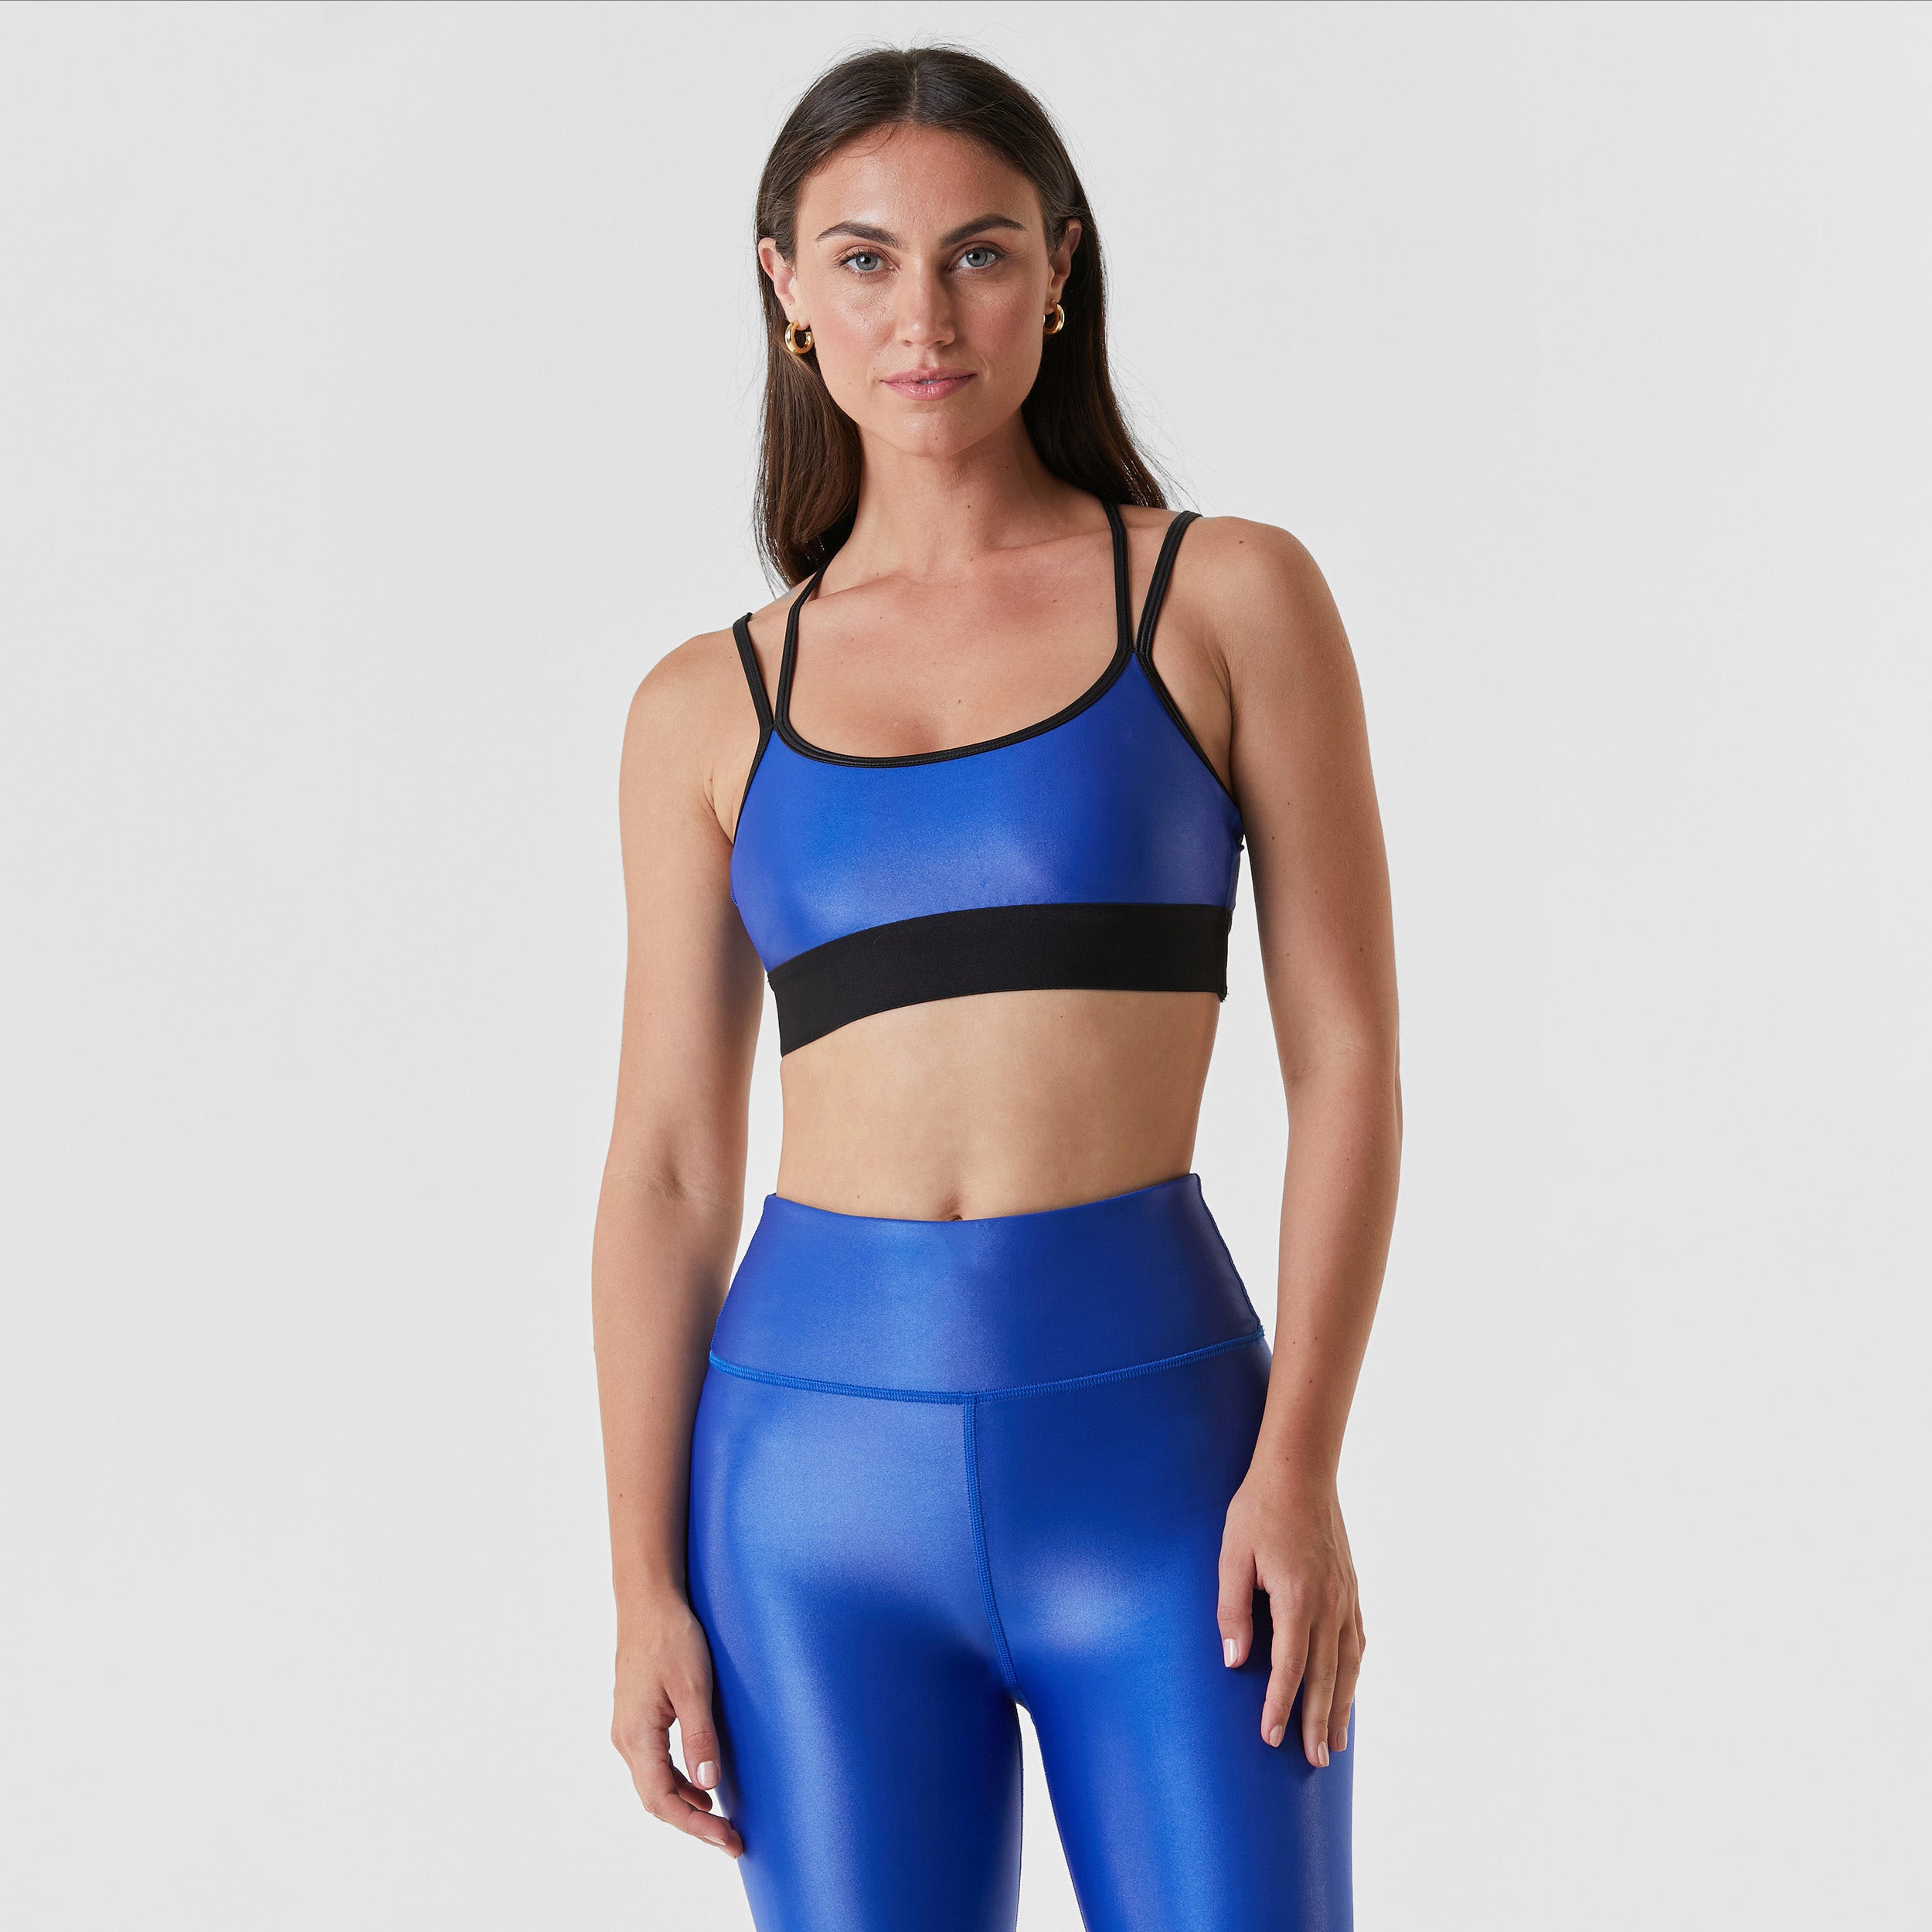 Front view of woman wearing cobalt blue gloss liquid sports bra featuring a scoop neckline and an alluring strappy back with a supportive elastic band